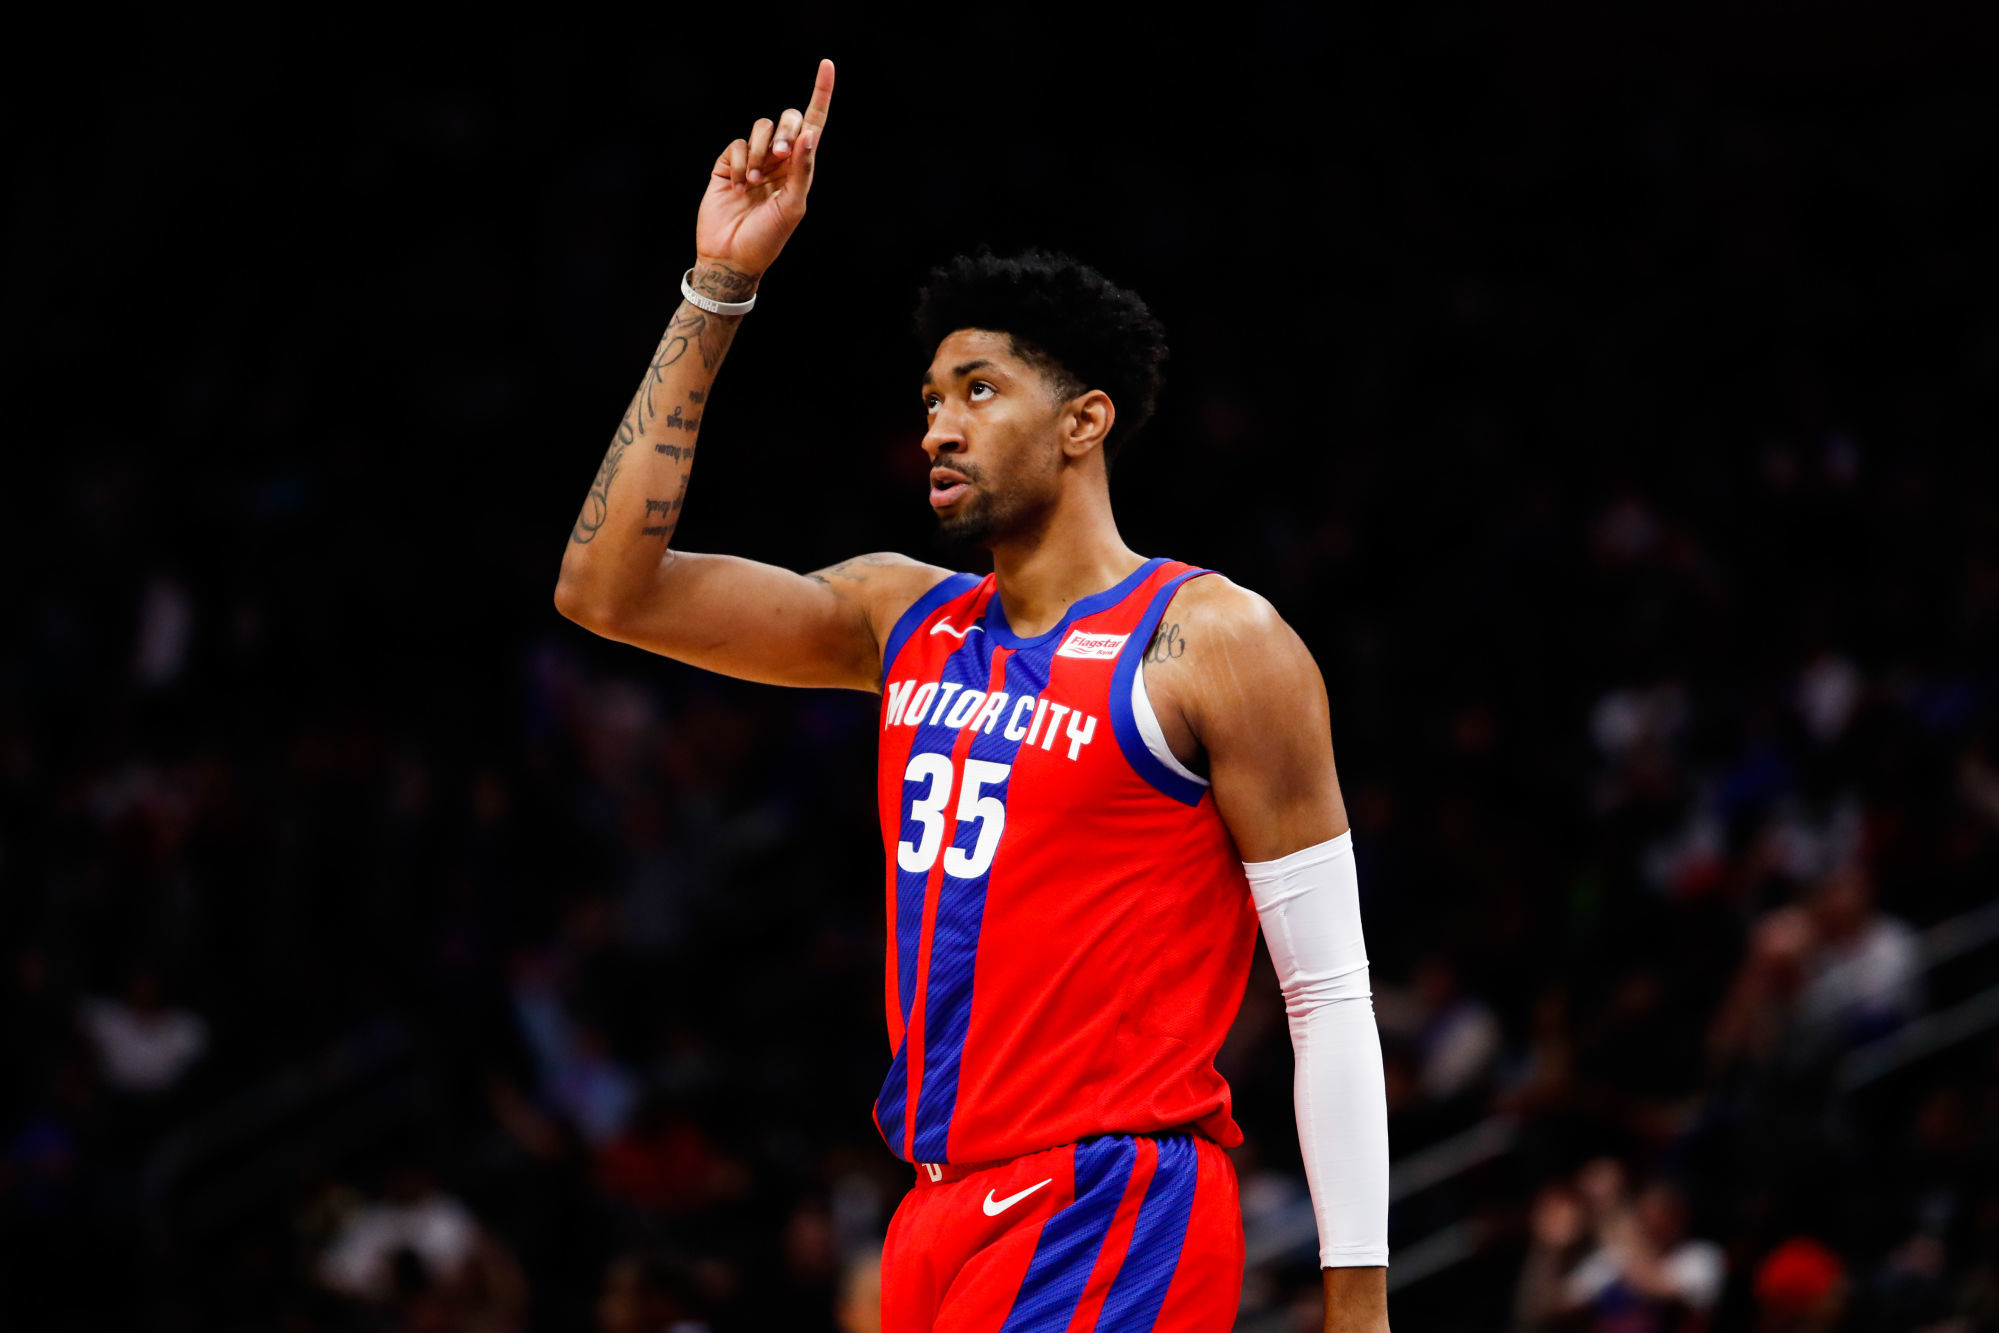 Dec 1, 2019; Detroit, MI, USA; Detroit Pistons forward Christian Wood (35) points up after a play during the third quarter against the San Antonio Spurs at Little Caesars Arena. Mandatory Credit: Raj Mehta-USA TODAY Sports/Sipa USA 

Photo by Icon Sport - Christian WOOD - Little Caesars Arena - Detroit (Etats Unis)